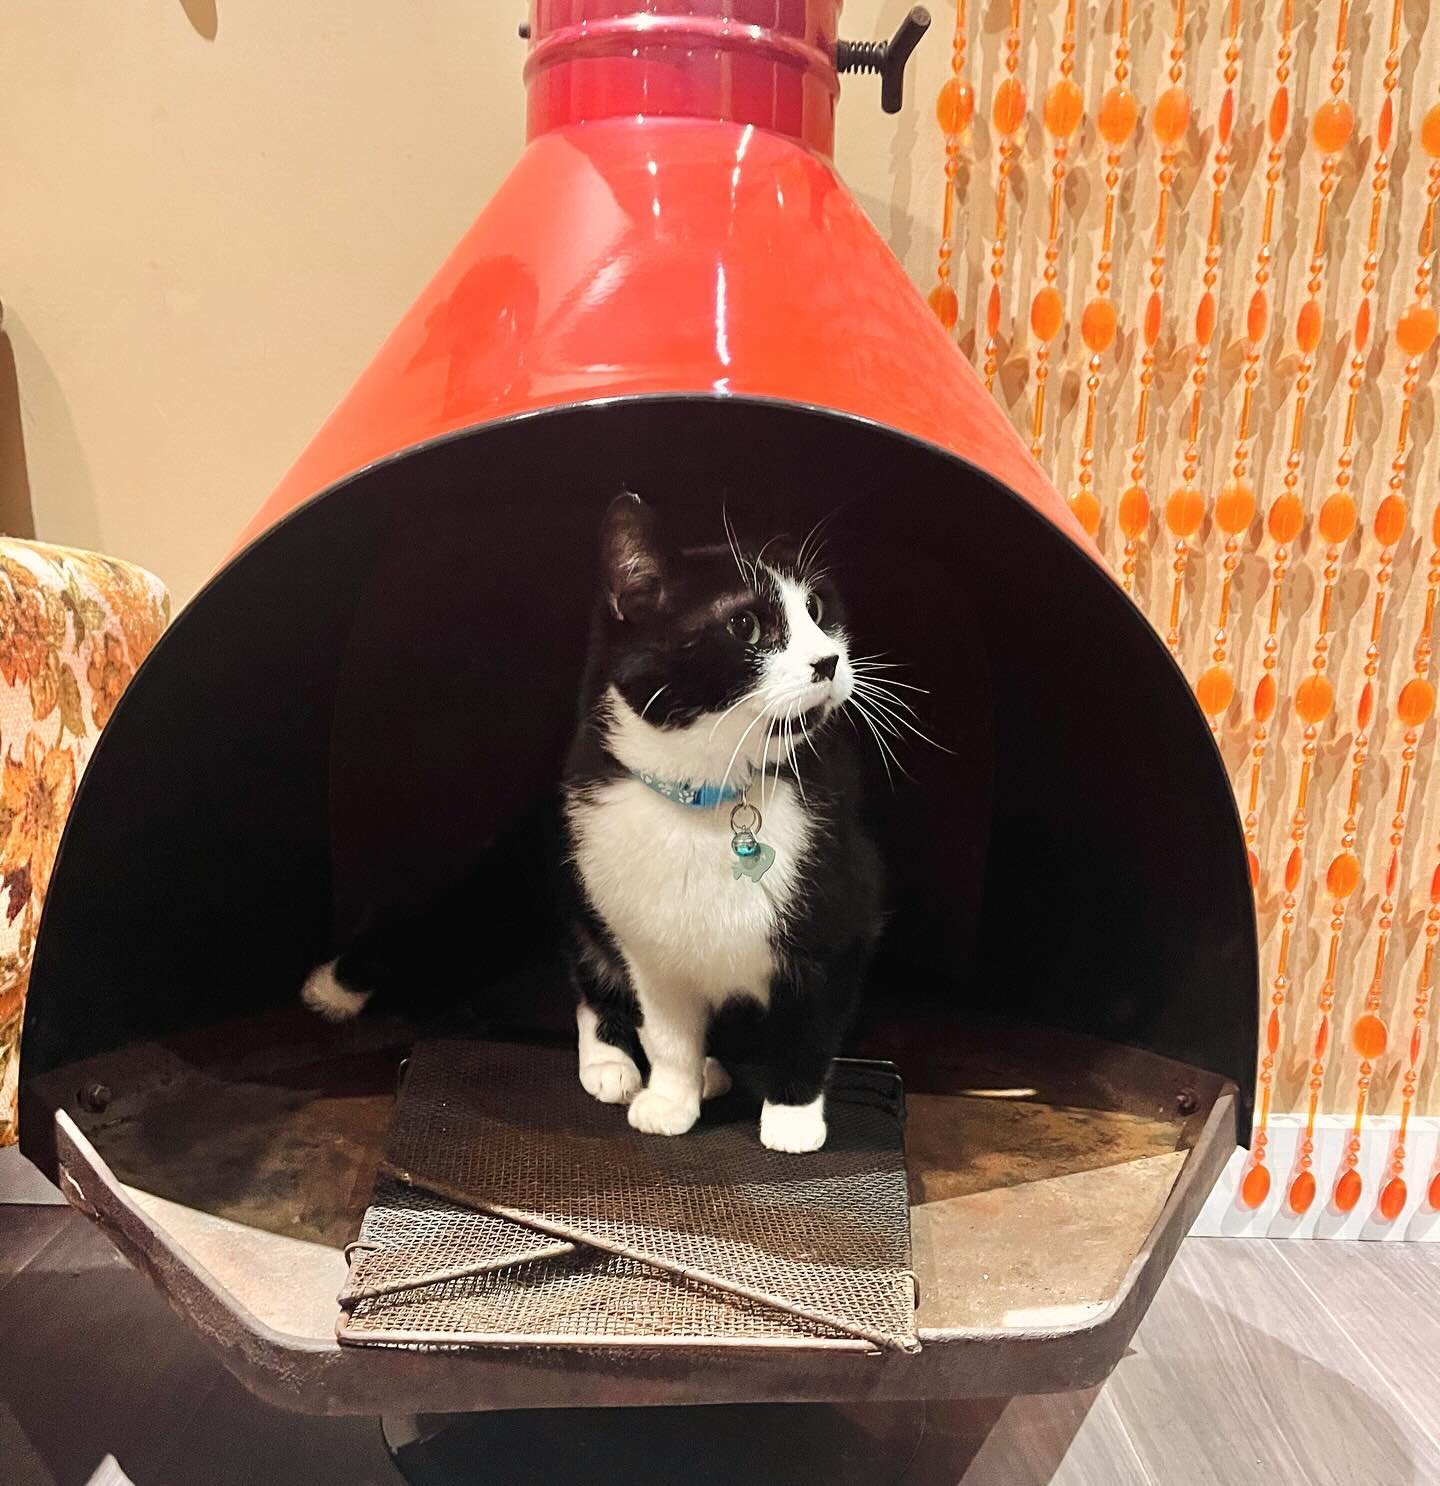 Sure you&rsquo;ve seen retro TVs turned into cat beds&hellip;. But what about a malm fireplace? 🐈&zwj;⬛

(JK, our cat just decided to check it out over the weekend &amp; we couldn&rsquo;t resist the photo op)